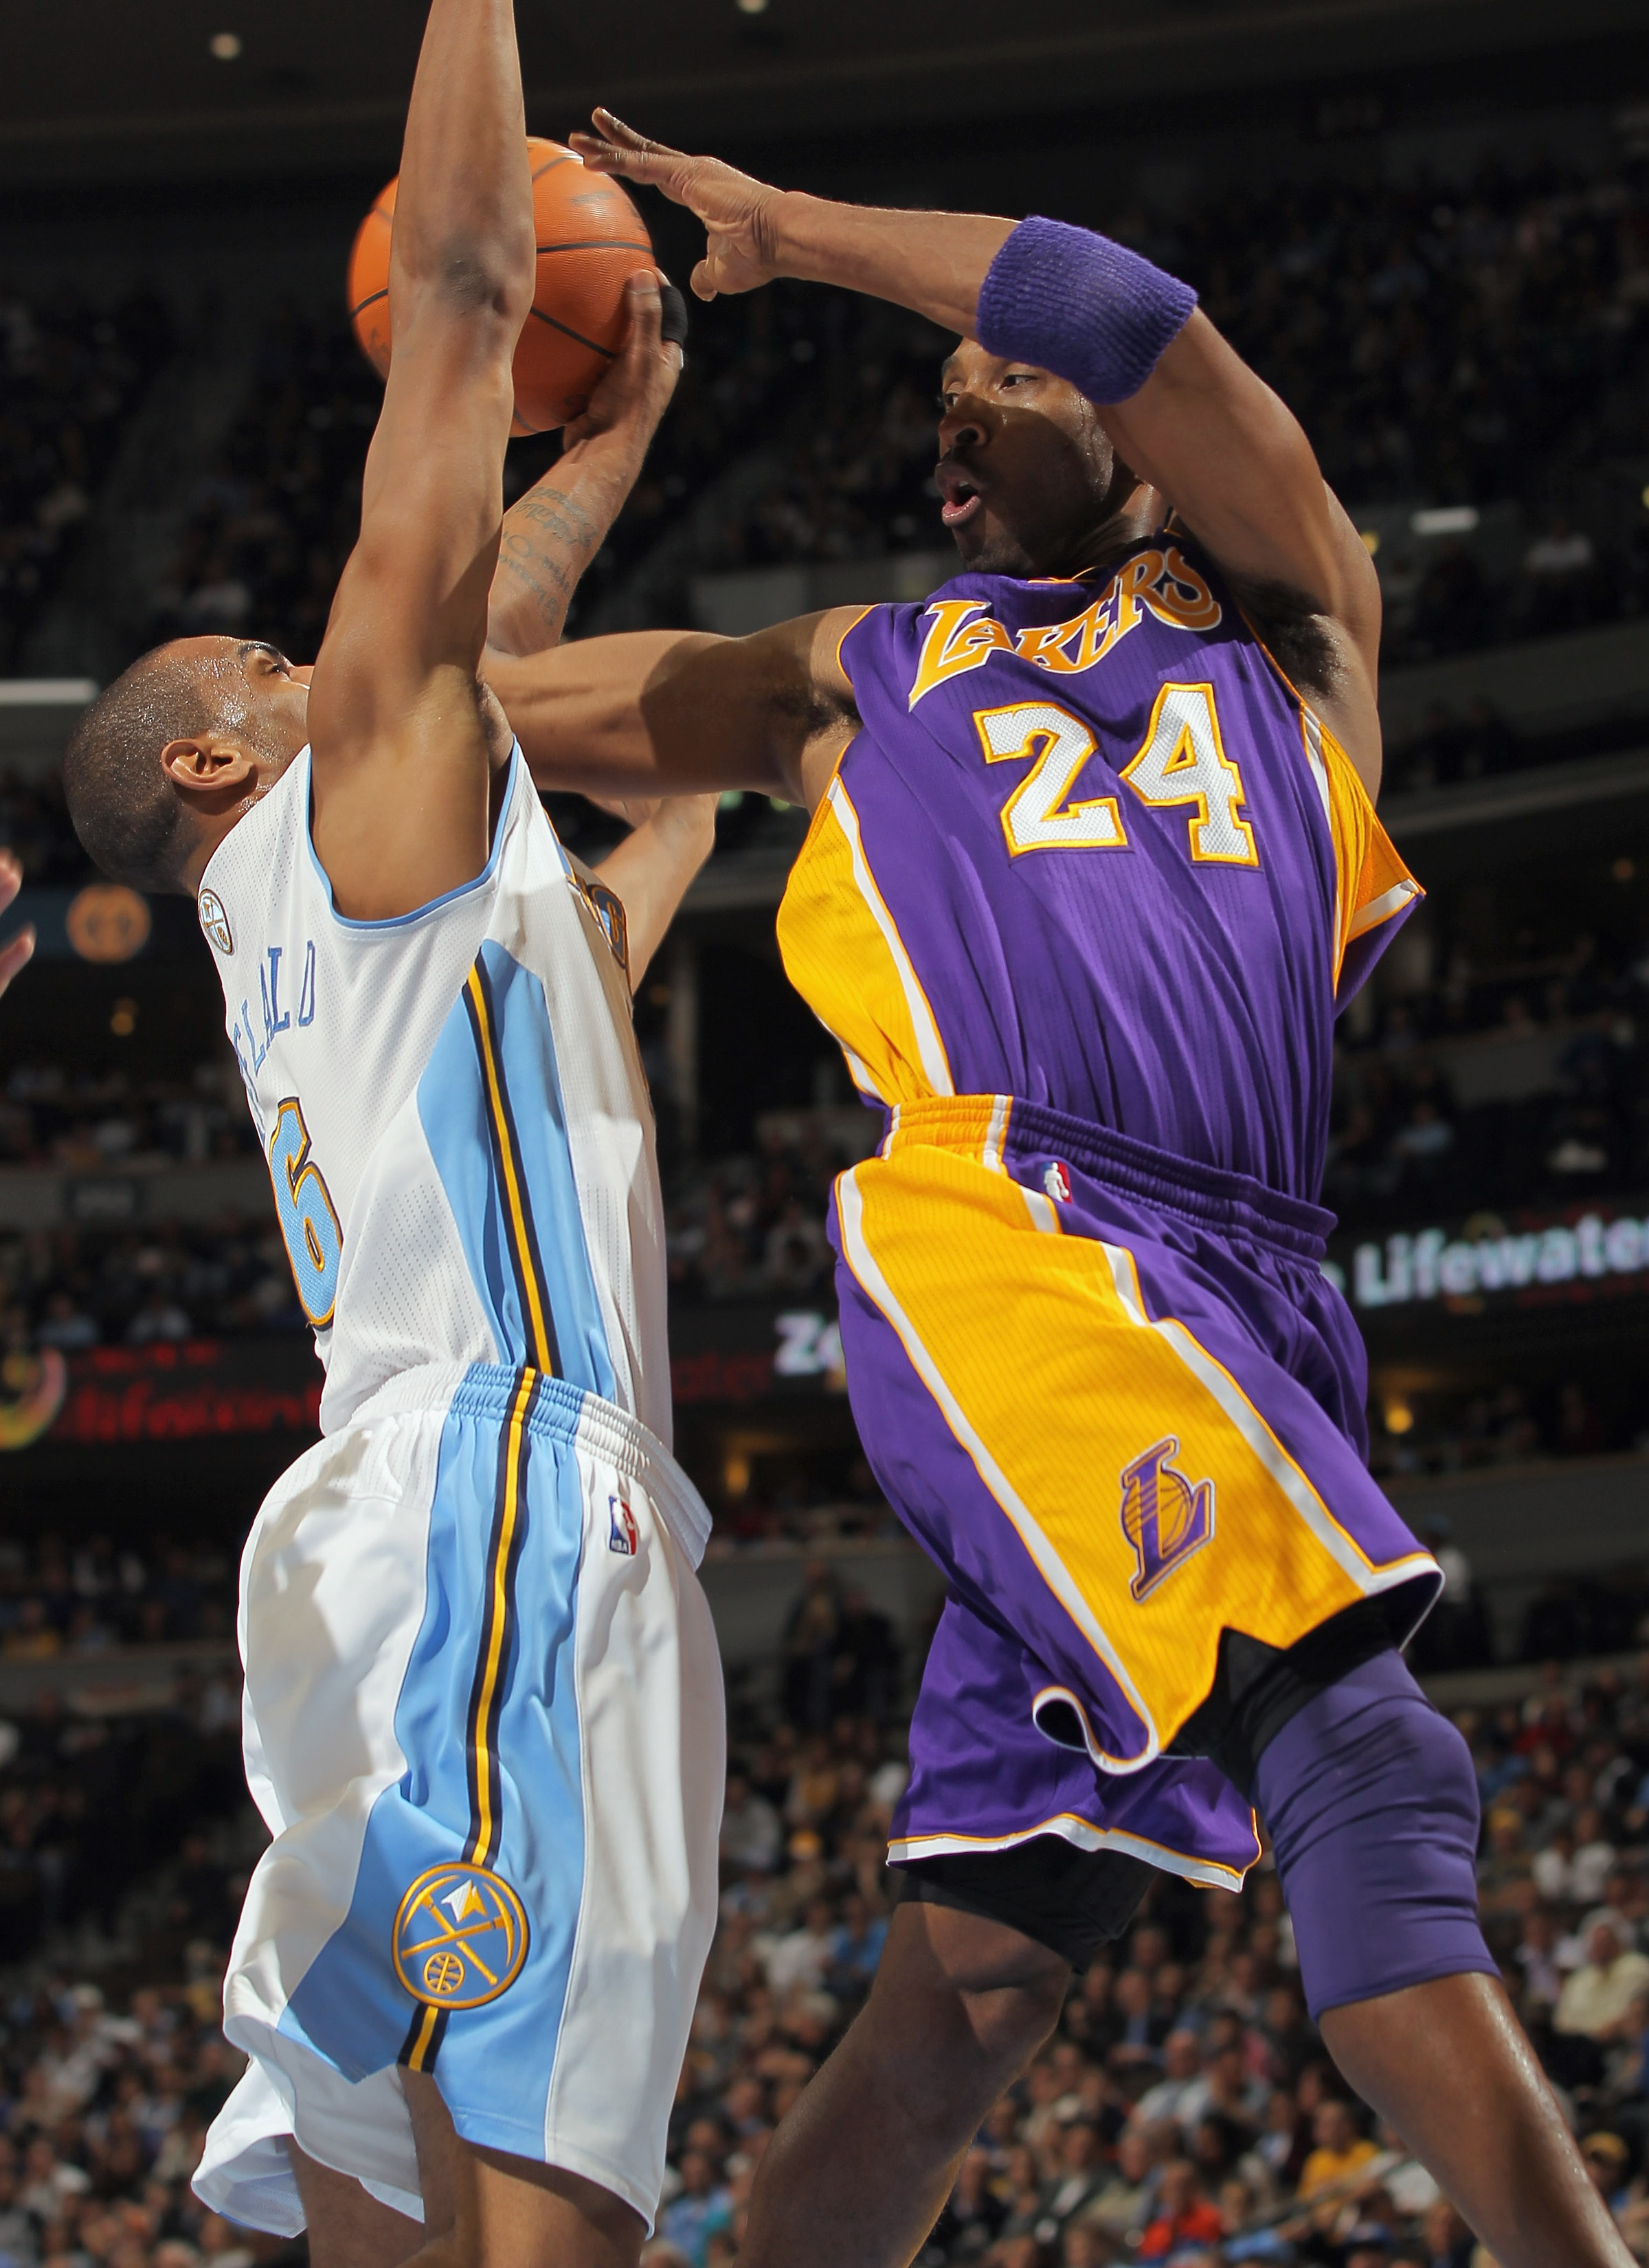 DENVER - NOVEMBER 11:  Kobe Bryant #24 of the Los Angeles Lakers dishes off a pass as Arron Afflalo #6 of the Denver Nuggets defends at the Pepsi Center on November 11, 2010 in Denver, Colorado. The Nuggets defeated the Lakers 118-112.  NOTE TO USER: User